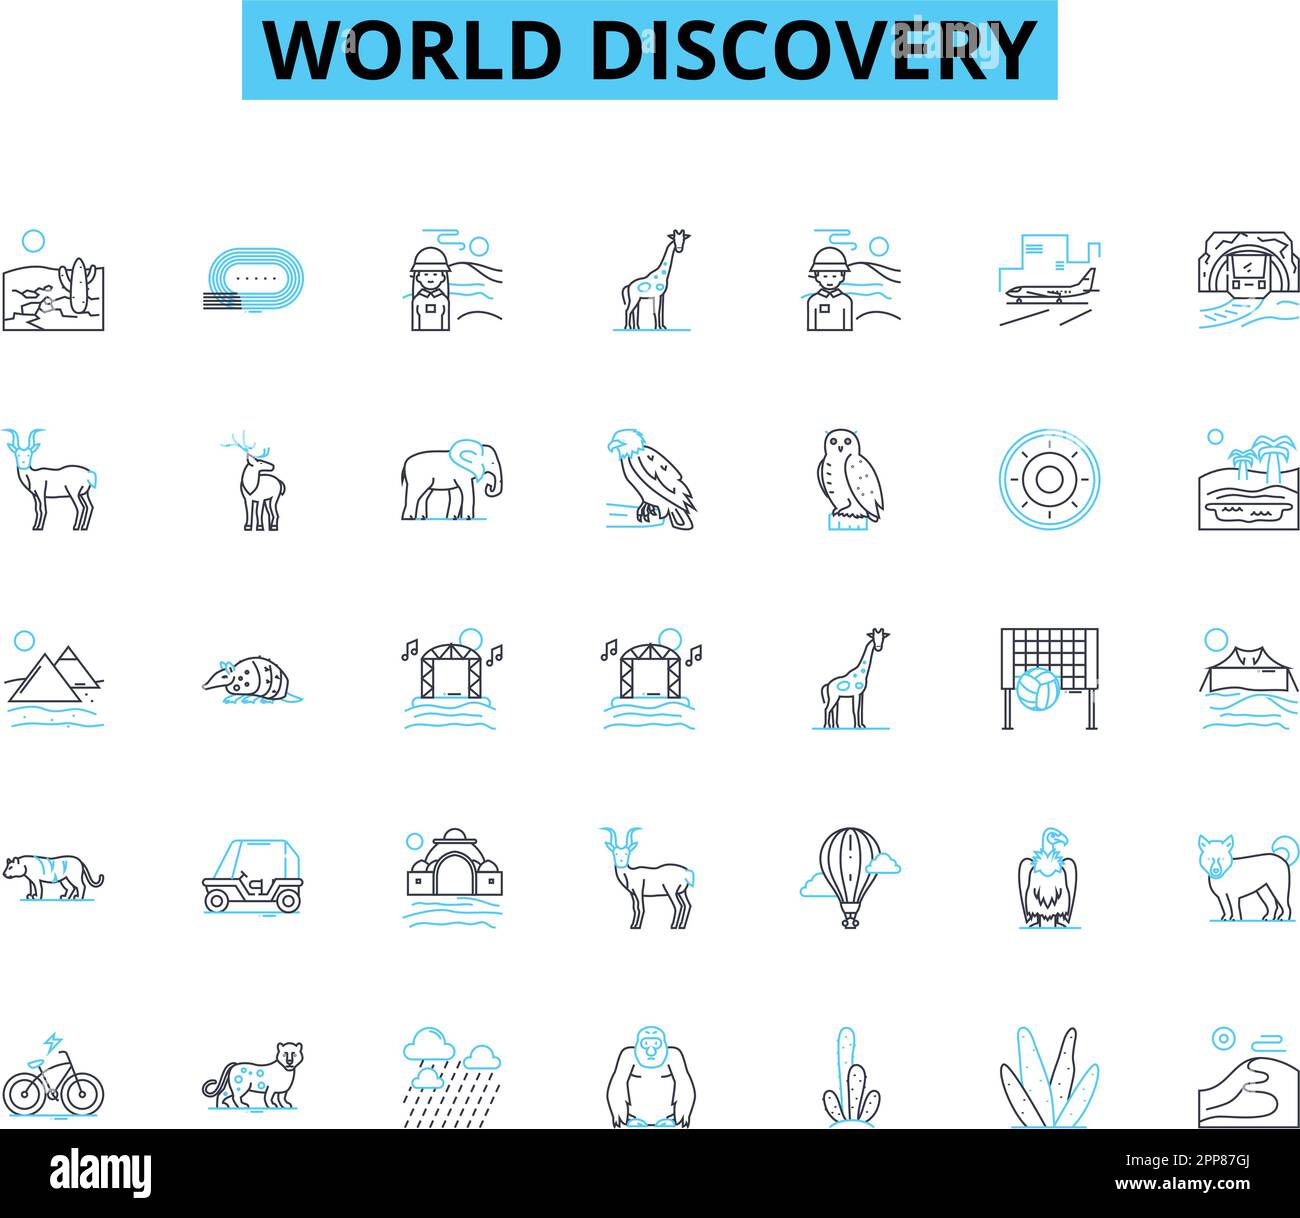 world discovery linear icons set. Exploration, Geology, Biodiversity, Anthropology, Archaeology, History, Ecology line vector and concept signs Stock Vector